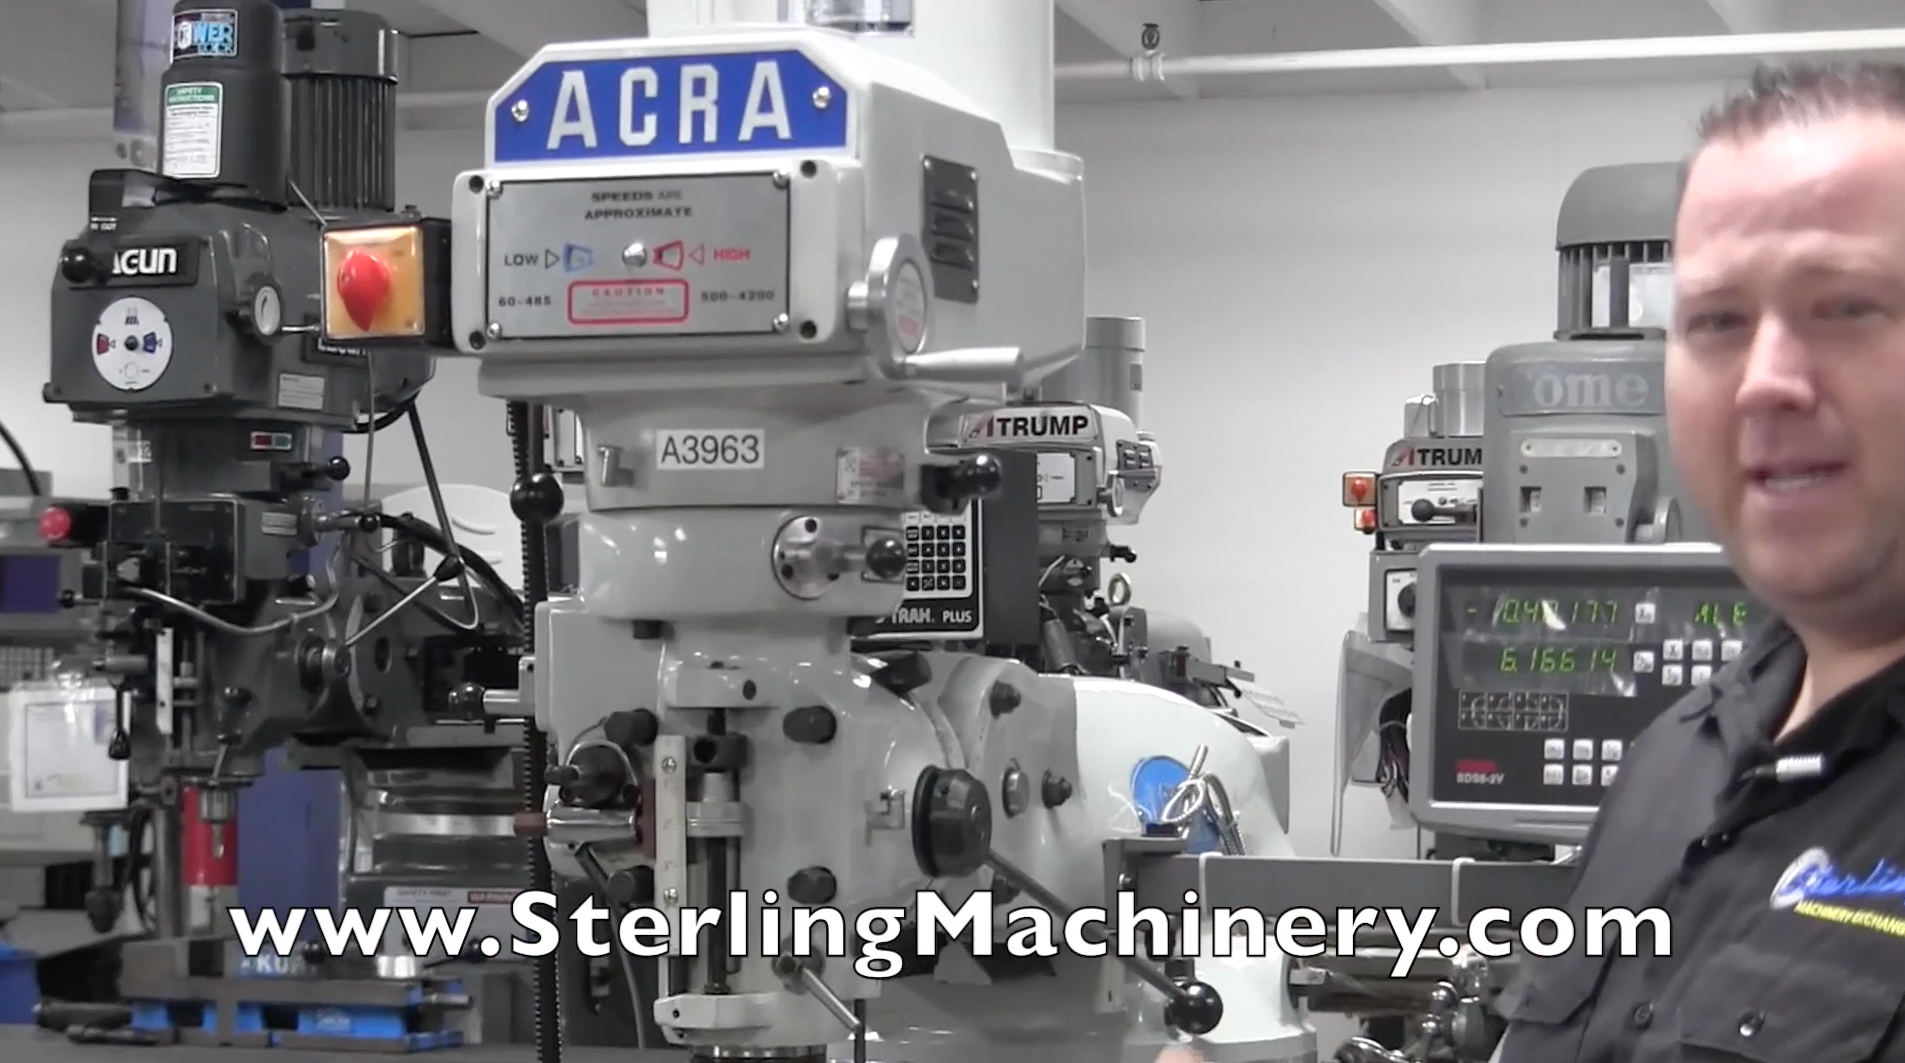 Acra-9" x 49" Brand New Acra Vertical Milling Machine (Variable Speed) "Bridgeport Copy", Mdl. AM2V-949, Hardened & Ground Table & Ways, Quill Heat Treat Hardened & Chromed, Double Wall Construction, Turcite On The Table X & Y Axis, One-Shot Lube System, Made-01